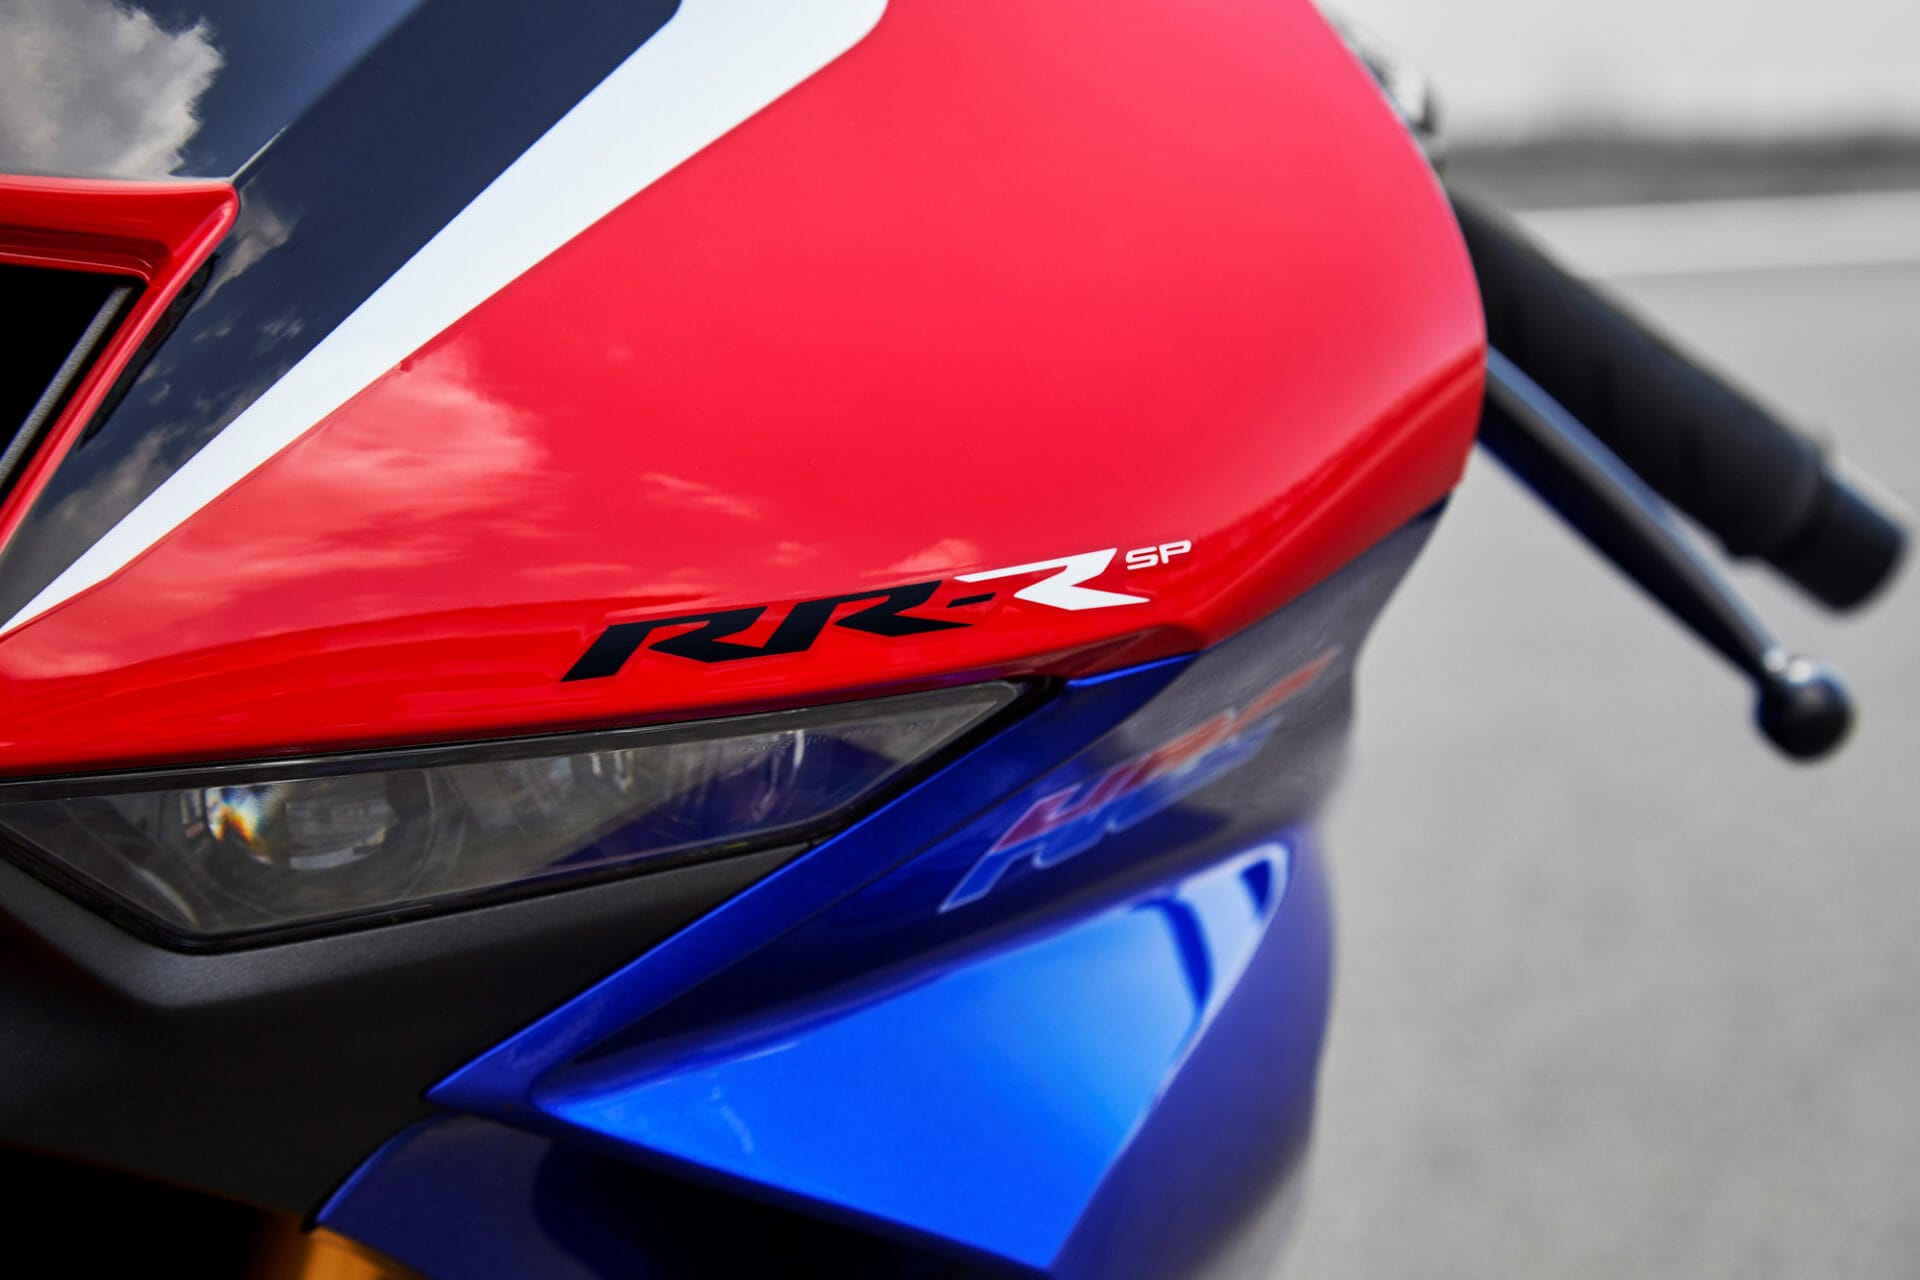 Will a new Honda CBR600 be launched in October?